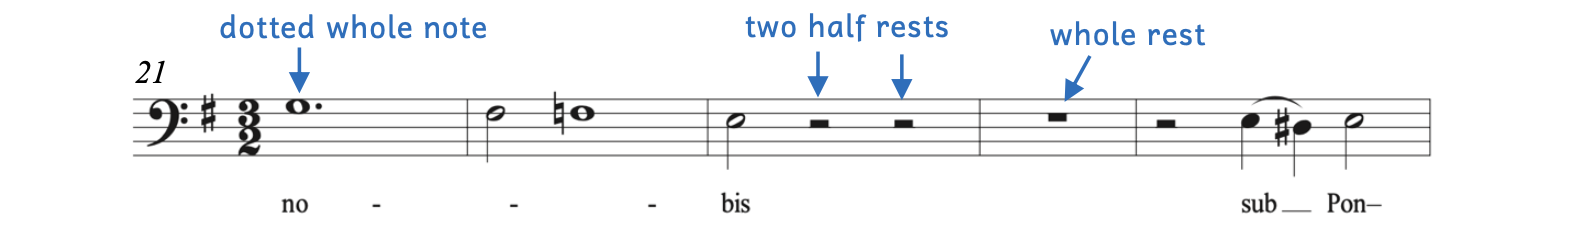 Bach's Crucifixus from B Minor Mass is in 3-2. It shows how a whole rest fills an entire measure in 3-2 but a dotted whole note fills an entire measure. Instead of a whole rest, two half rests are used when the first part of the measure already has a half note.